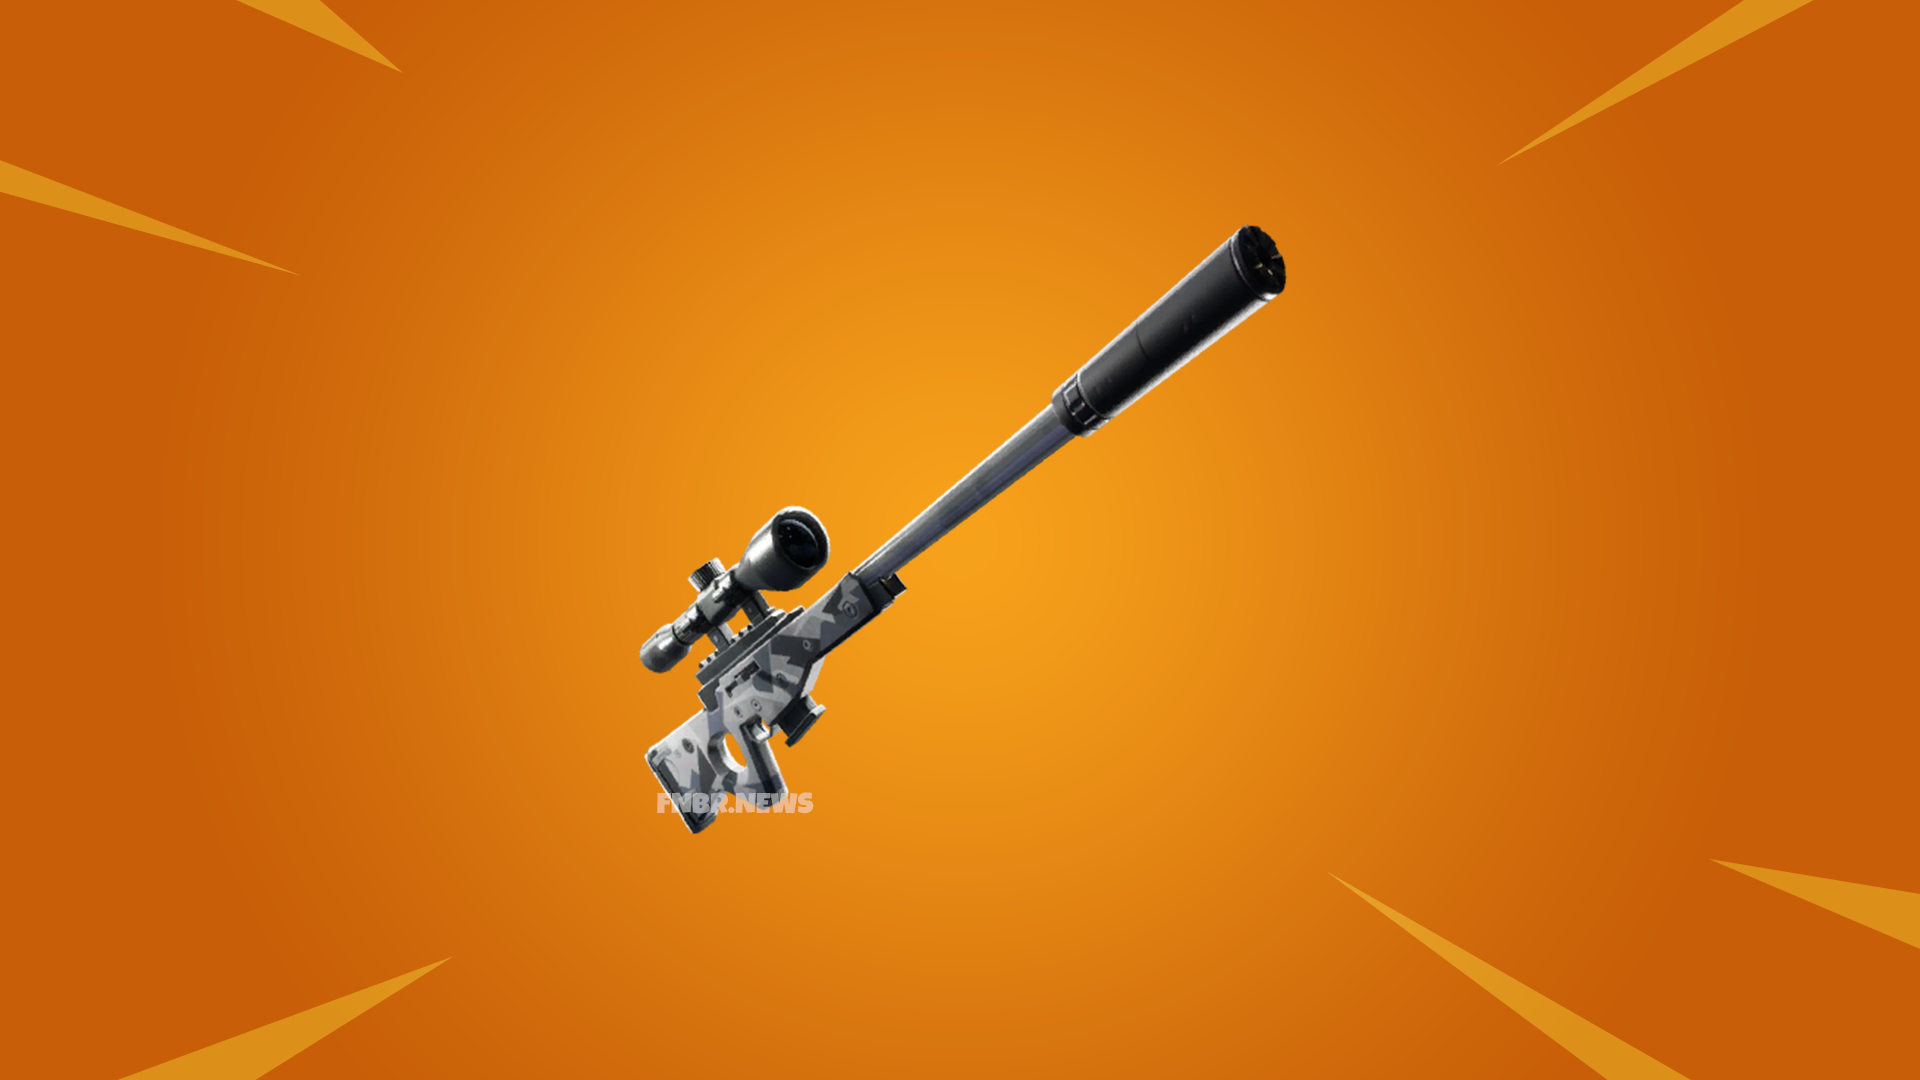 Leak: Suppressed Sniper Rifle Coming to Fortnite Battle Royale